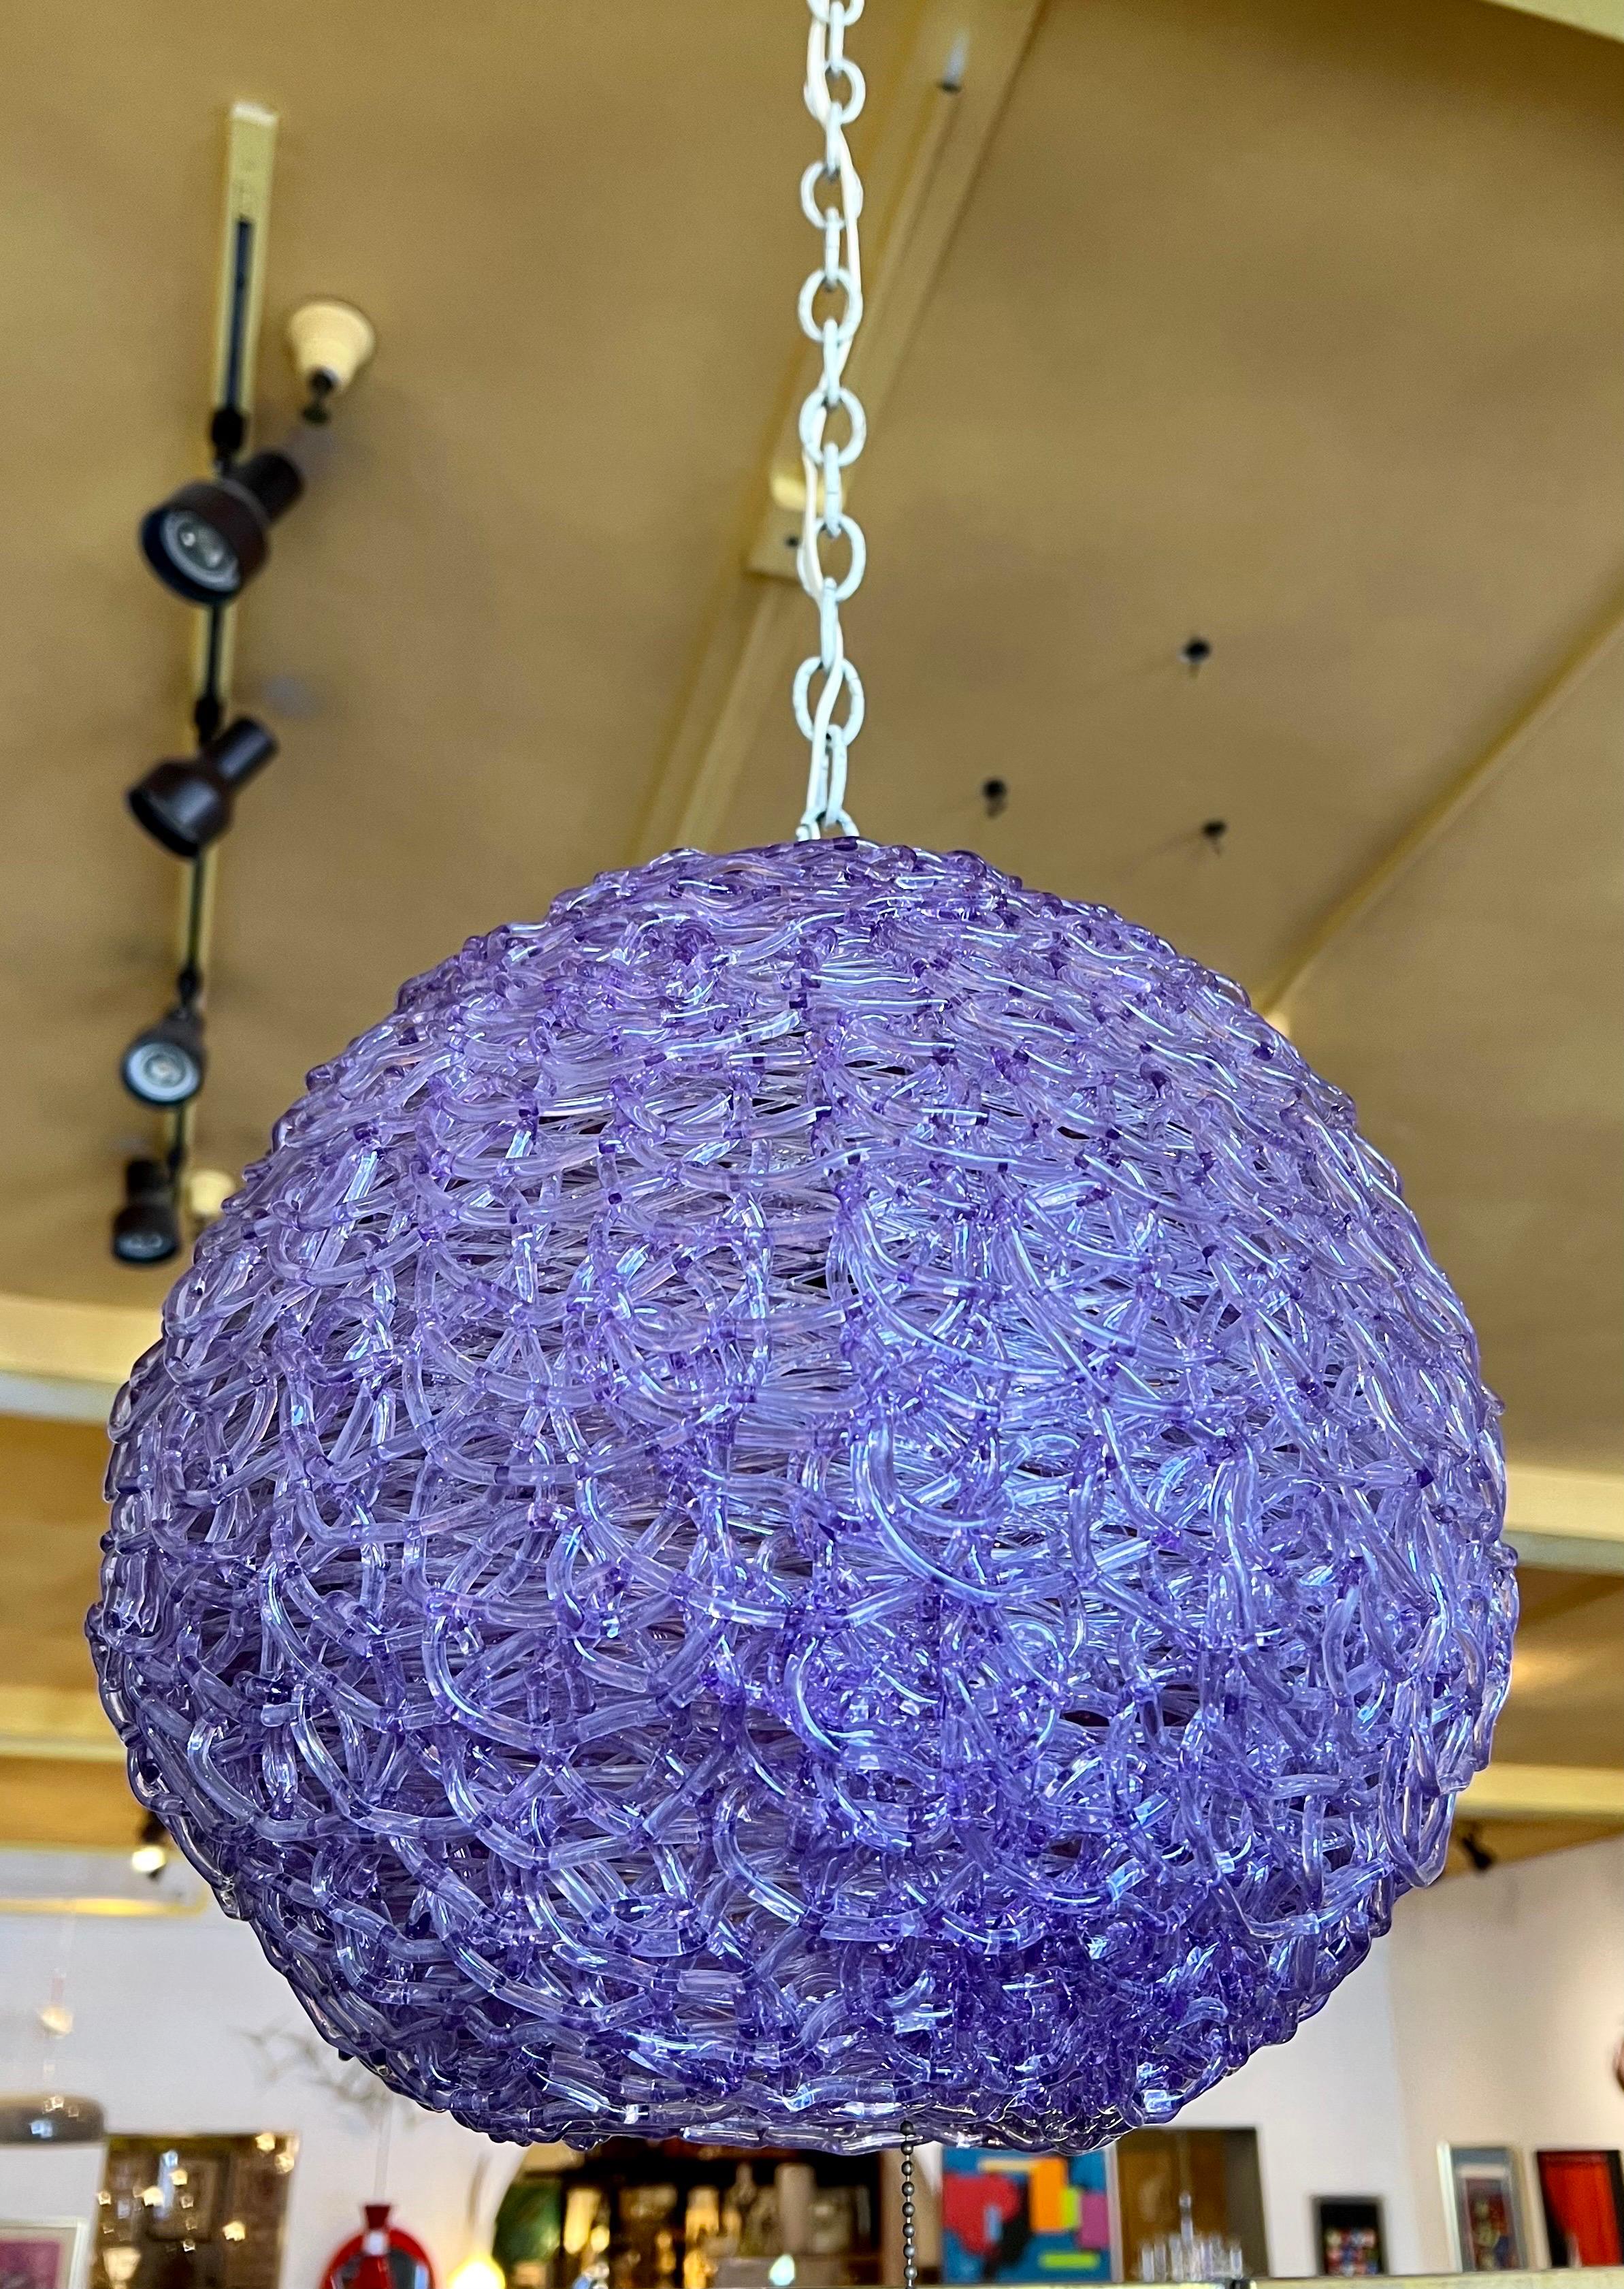 A rare color and great condition on this beautiful groove purple pendant spaghetti lamp, circa 1950s with a white chain 10-foot cord in perfect condition.